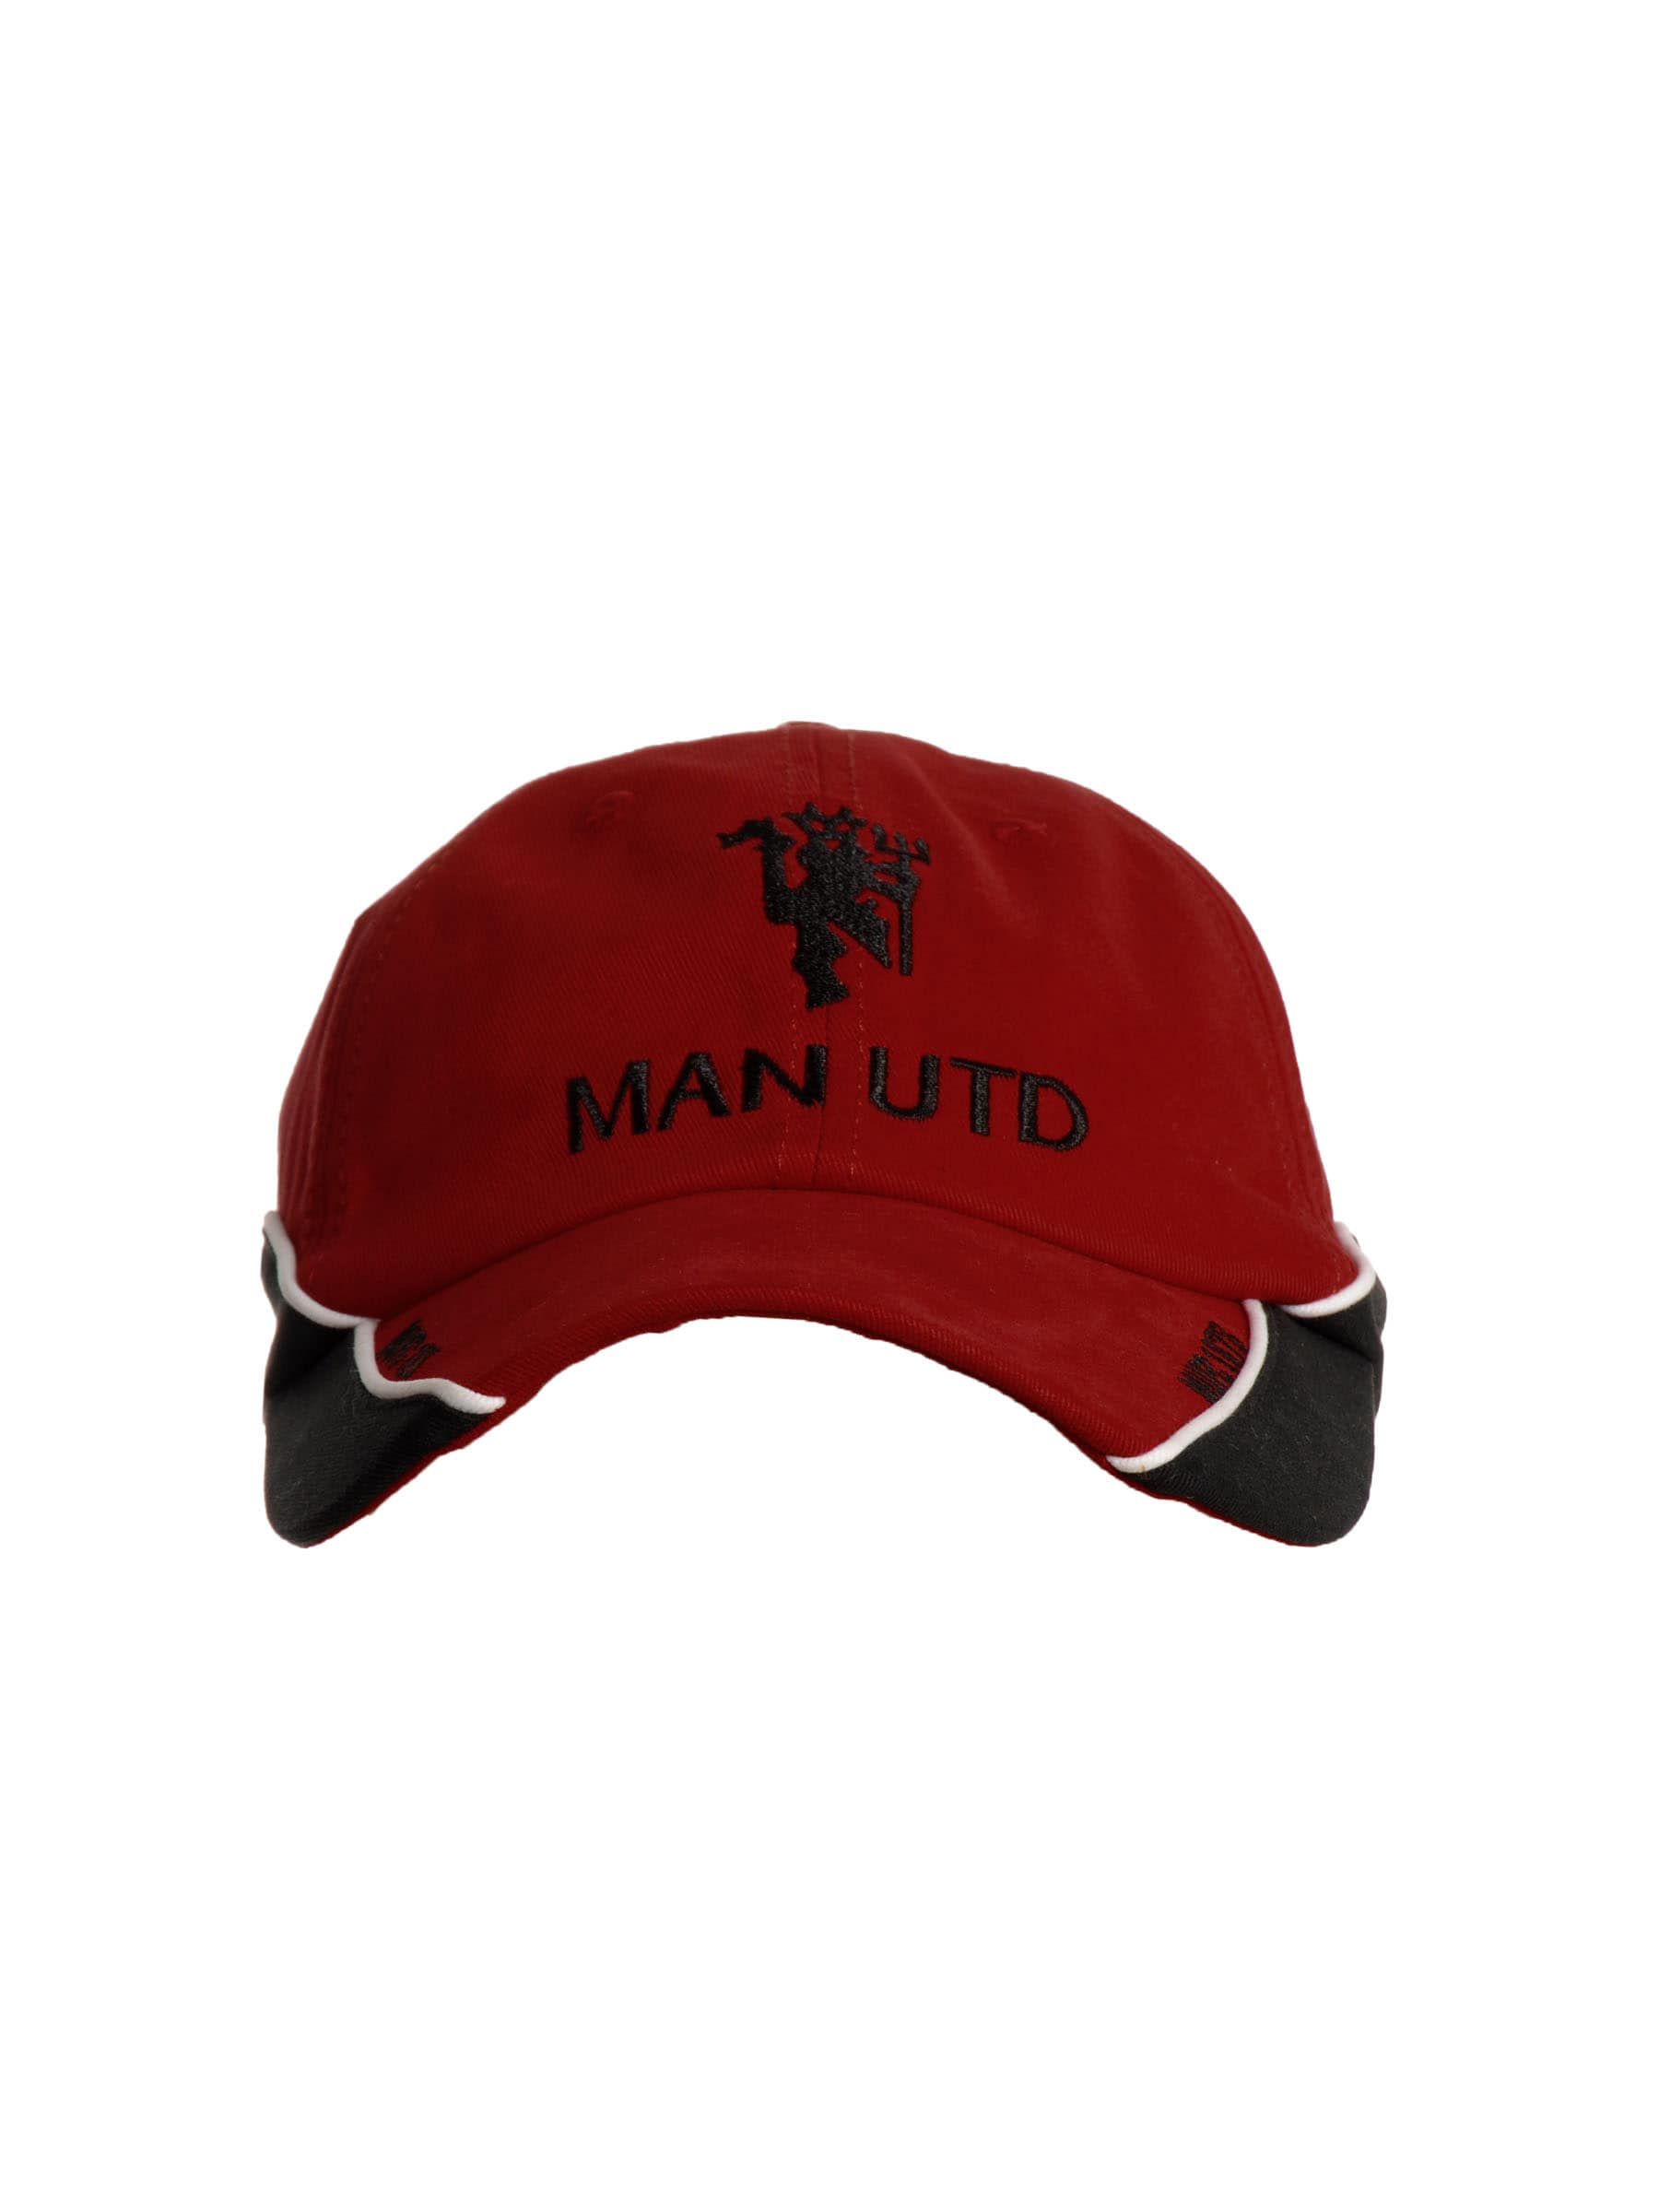 Manchester United Men Solid Red Cap